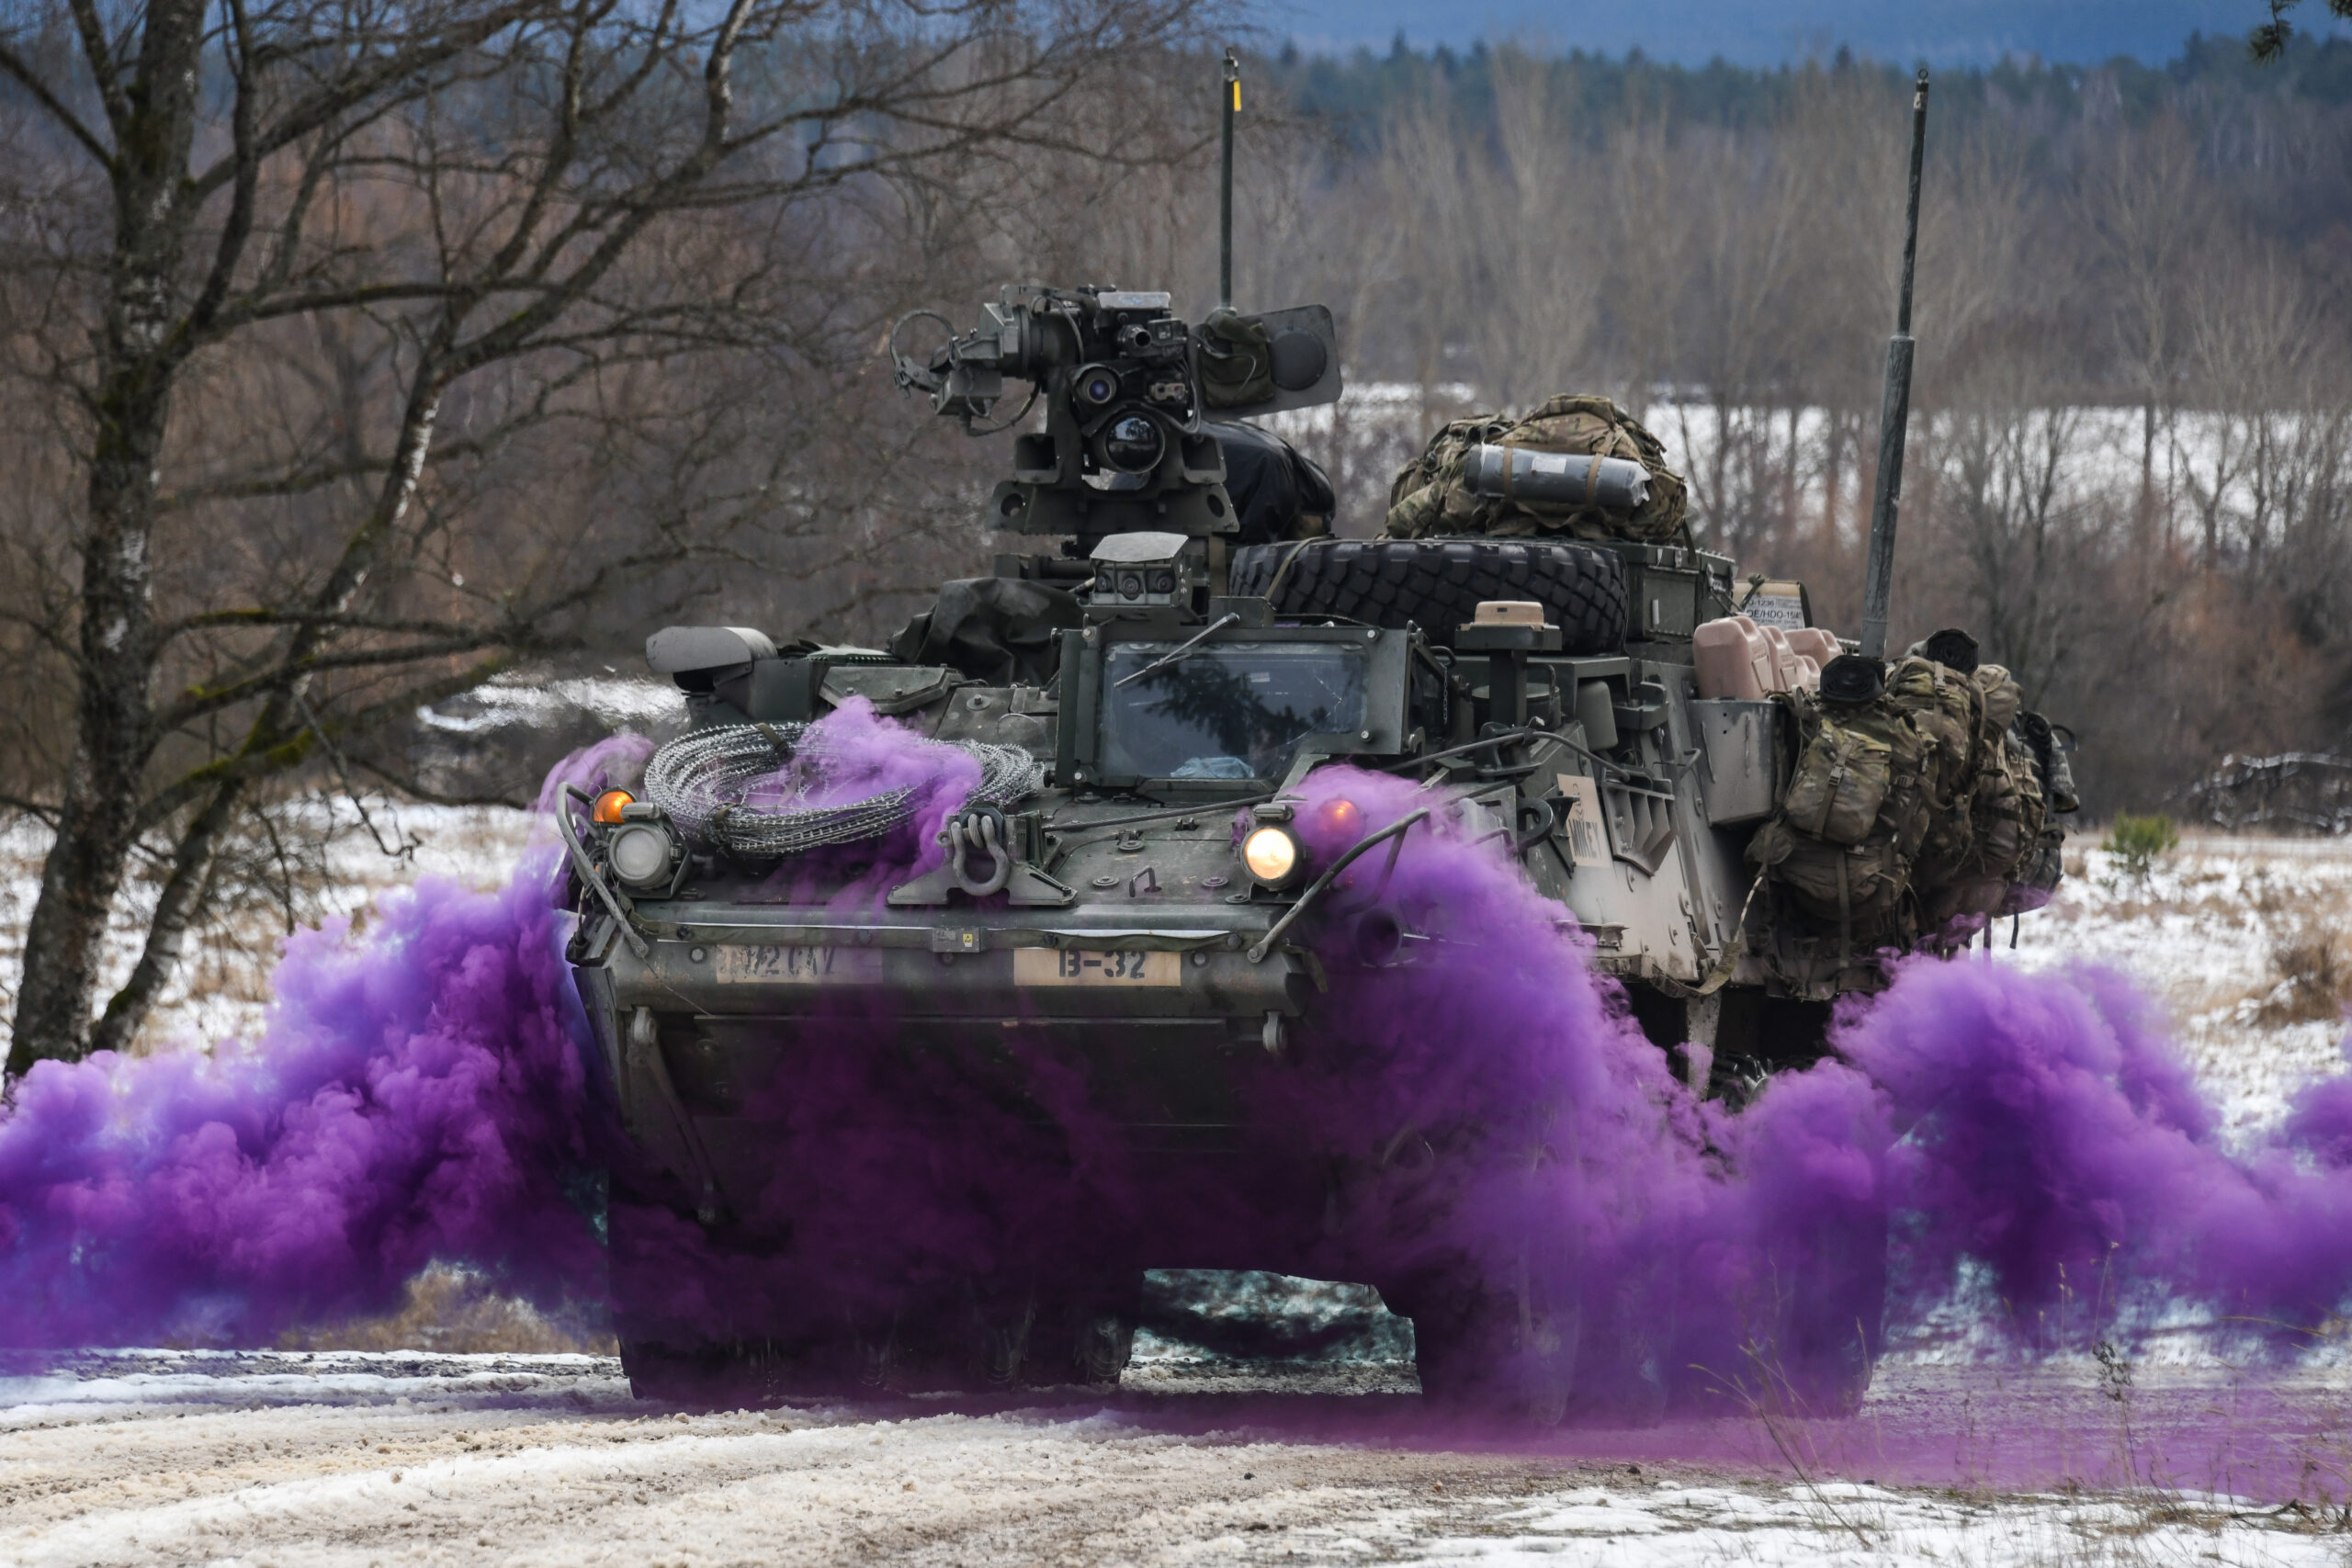 File Photo of American Tank in Germany with Purple Smoke, adapted from defense.gov image with photo credit to Markus Rauchenberger, U.S. Army